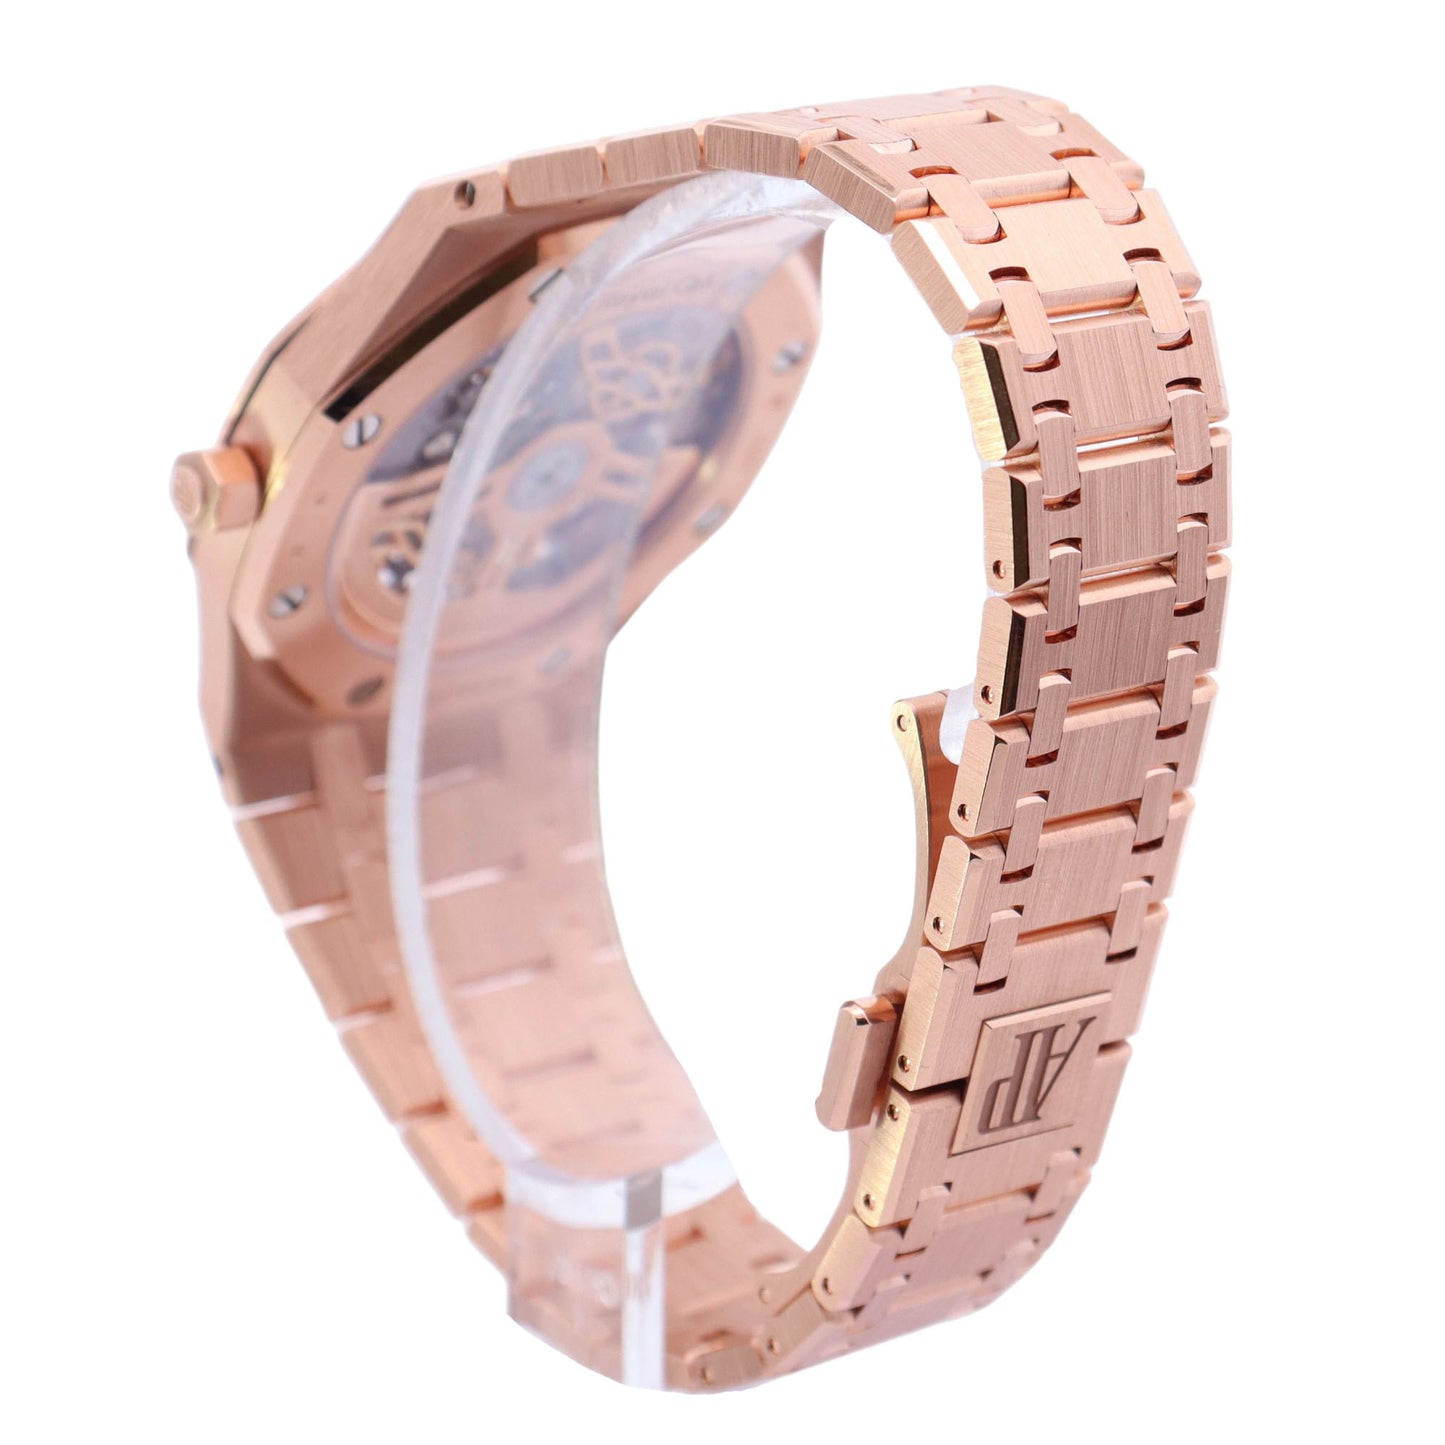 Audemars Piguet Royal Oak Jumbo Extra-Thin Openworked "50th Anniversary" Rose Gold 39mm Openwork Stcik Dial Watch Ref# 16204OR.OO.1240OR.01 - Happy Jewelers Fine Jewelry Lifetime Warranty